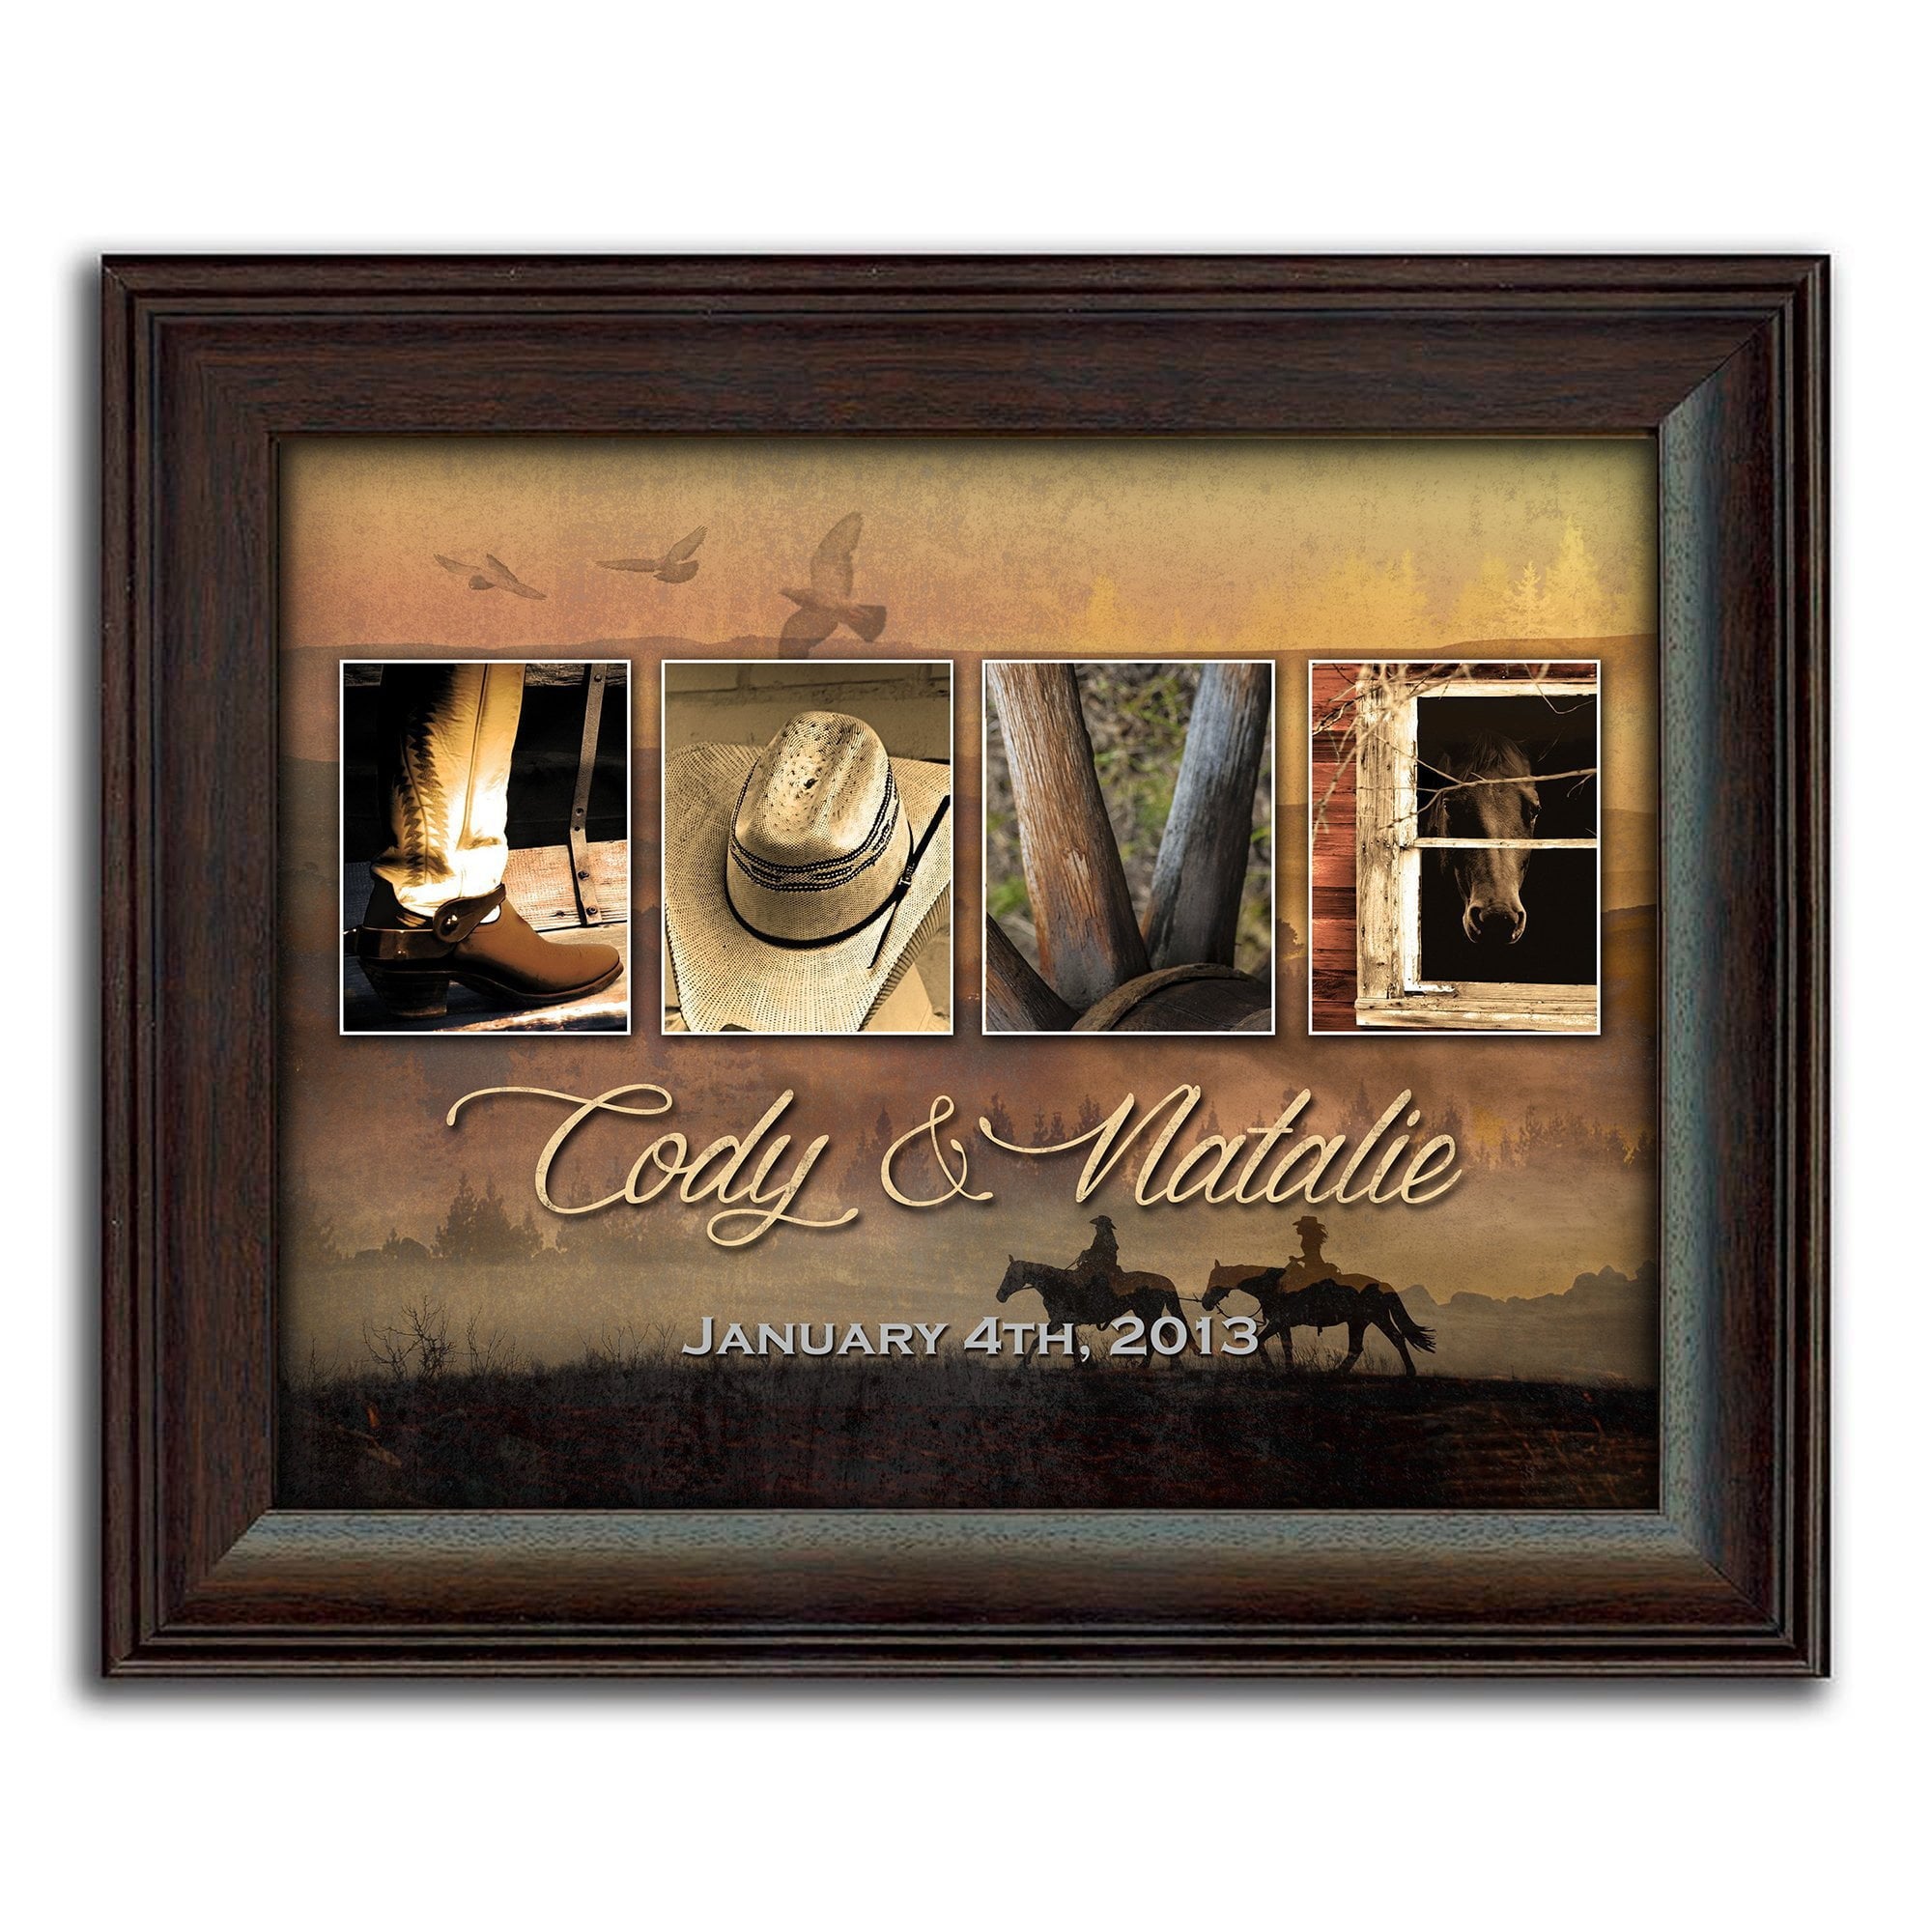 Love Letters Framed Western Art & Romantic Gift for Country Wedding